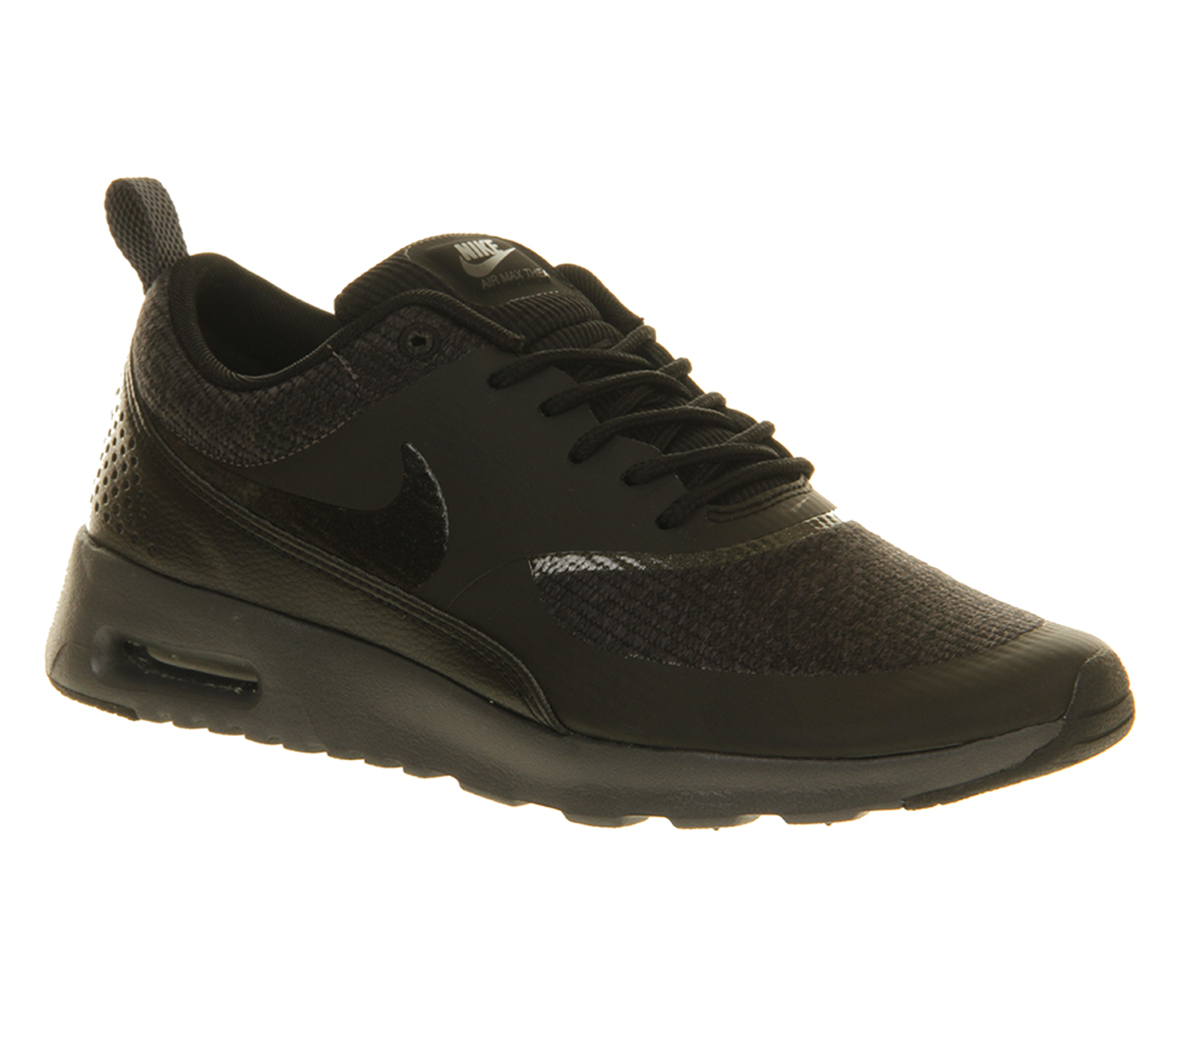 Nike Thea Black Hotsell, SAVE 50% - thlaw.co.nz